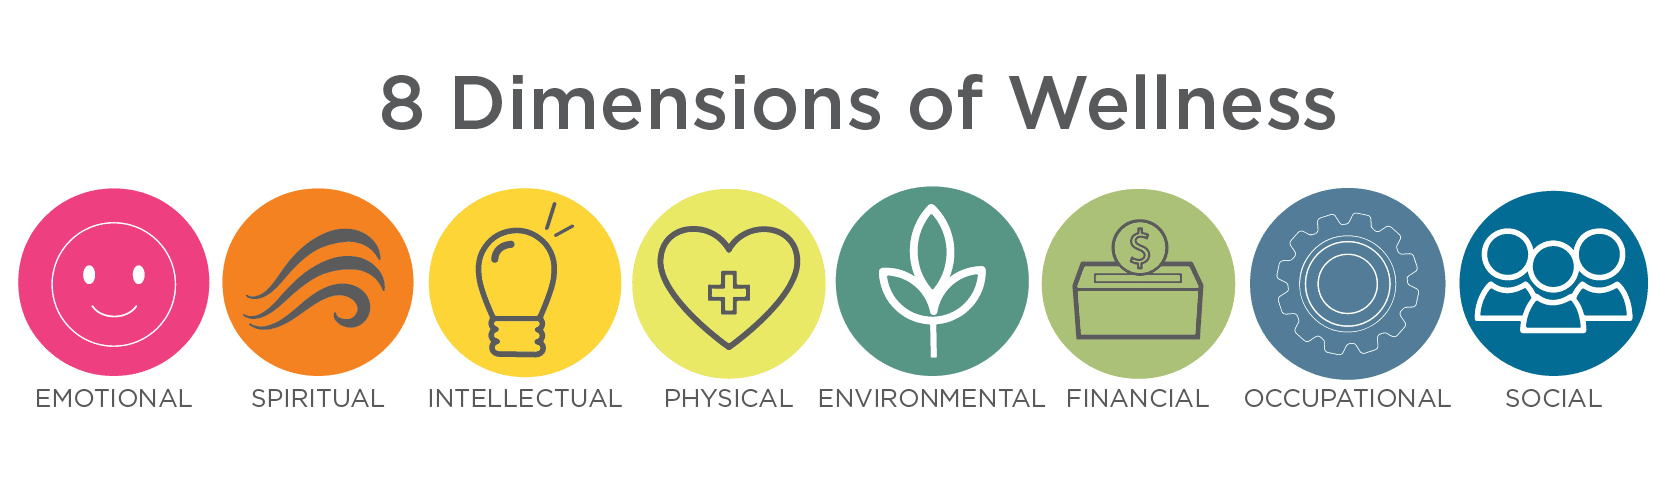 Illustration of 8 dimensions of wellness